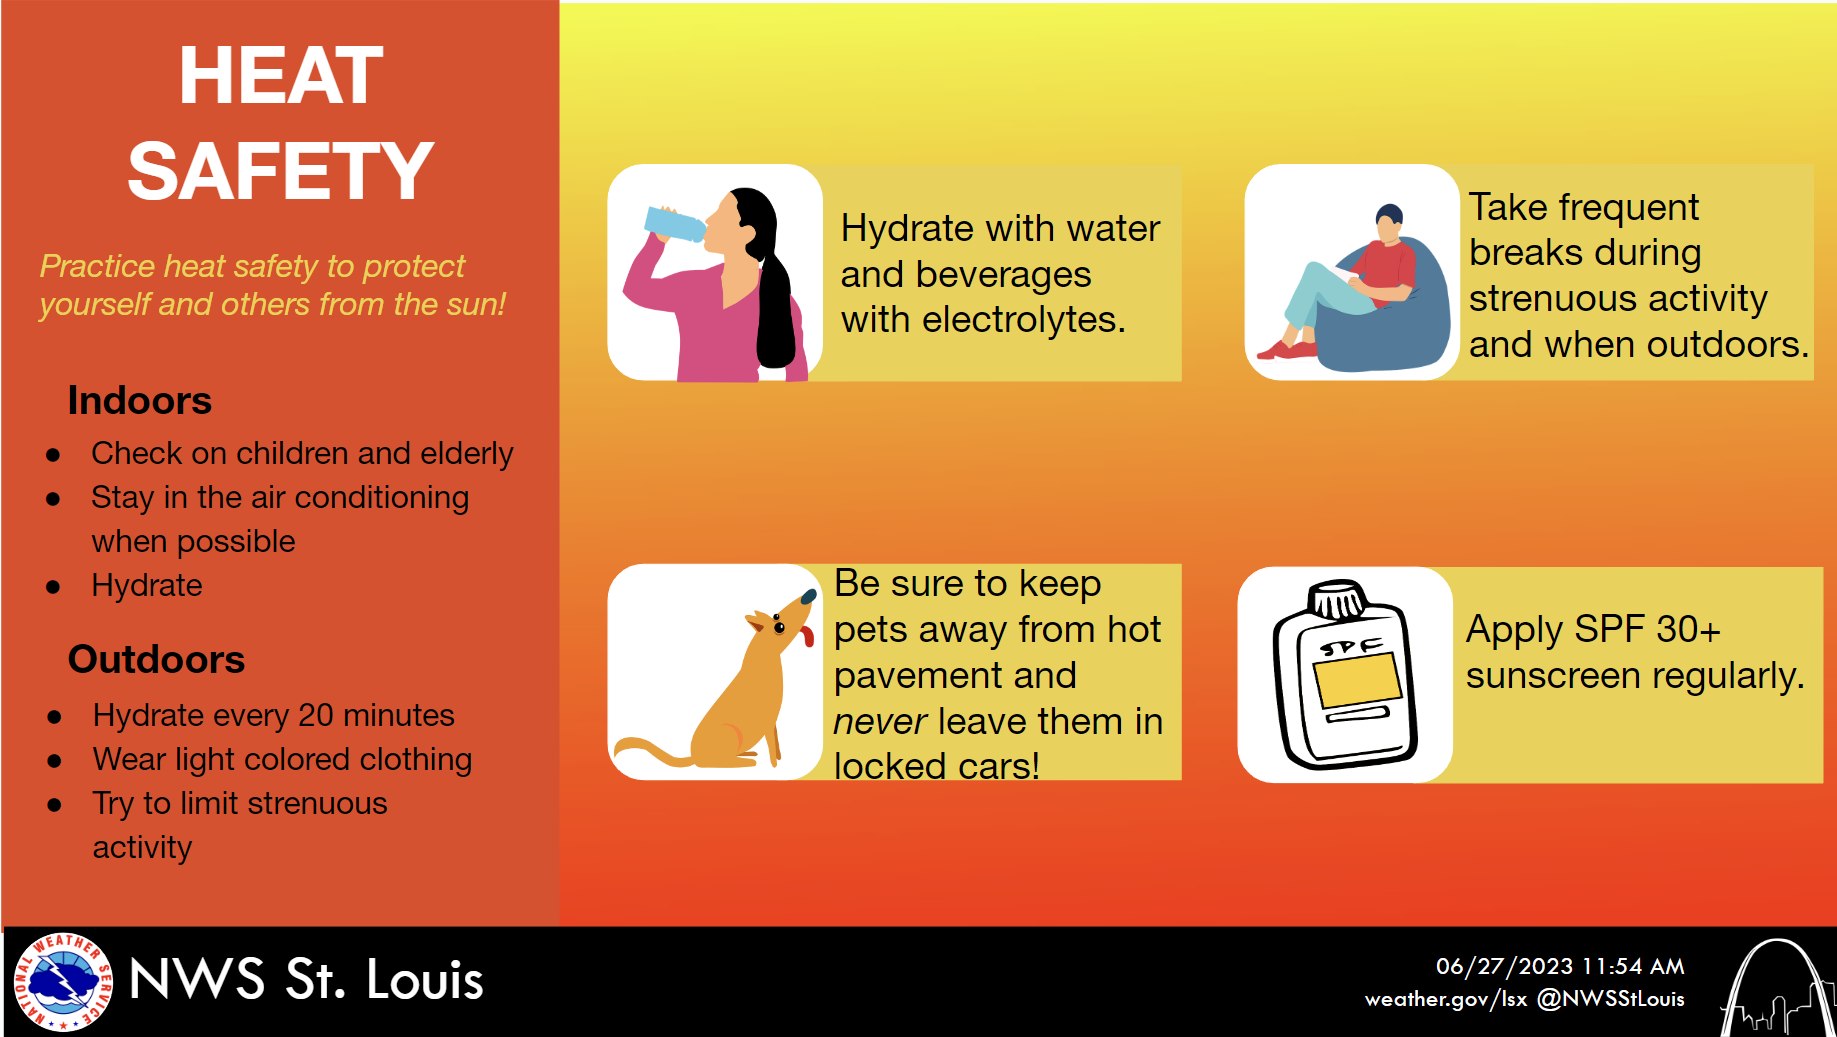 Image with heat safety tips